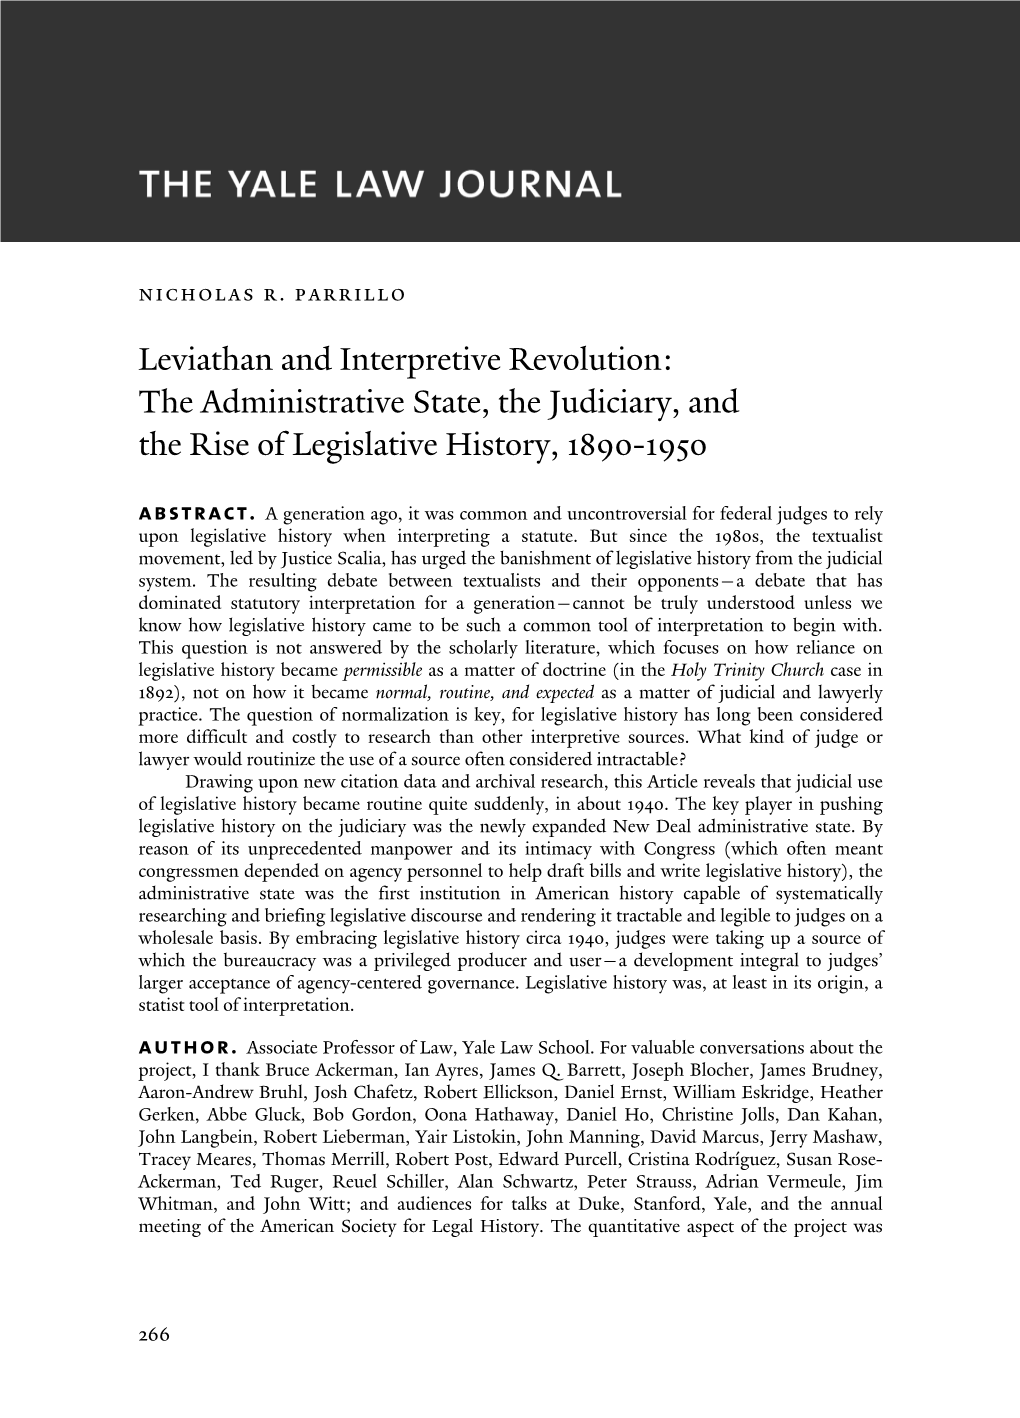 The Administrative State, the Judiciary, and the Rise of Legislative History, 1890-1950 Abstract